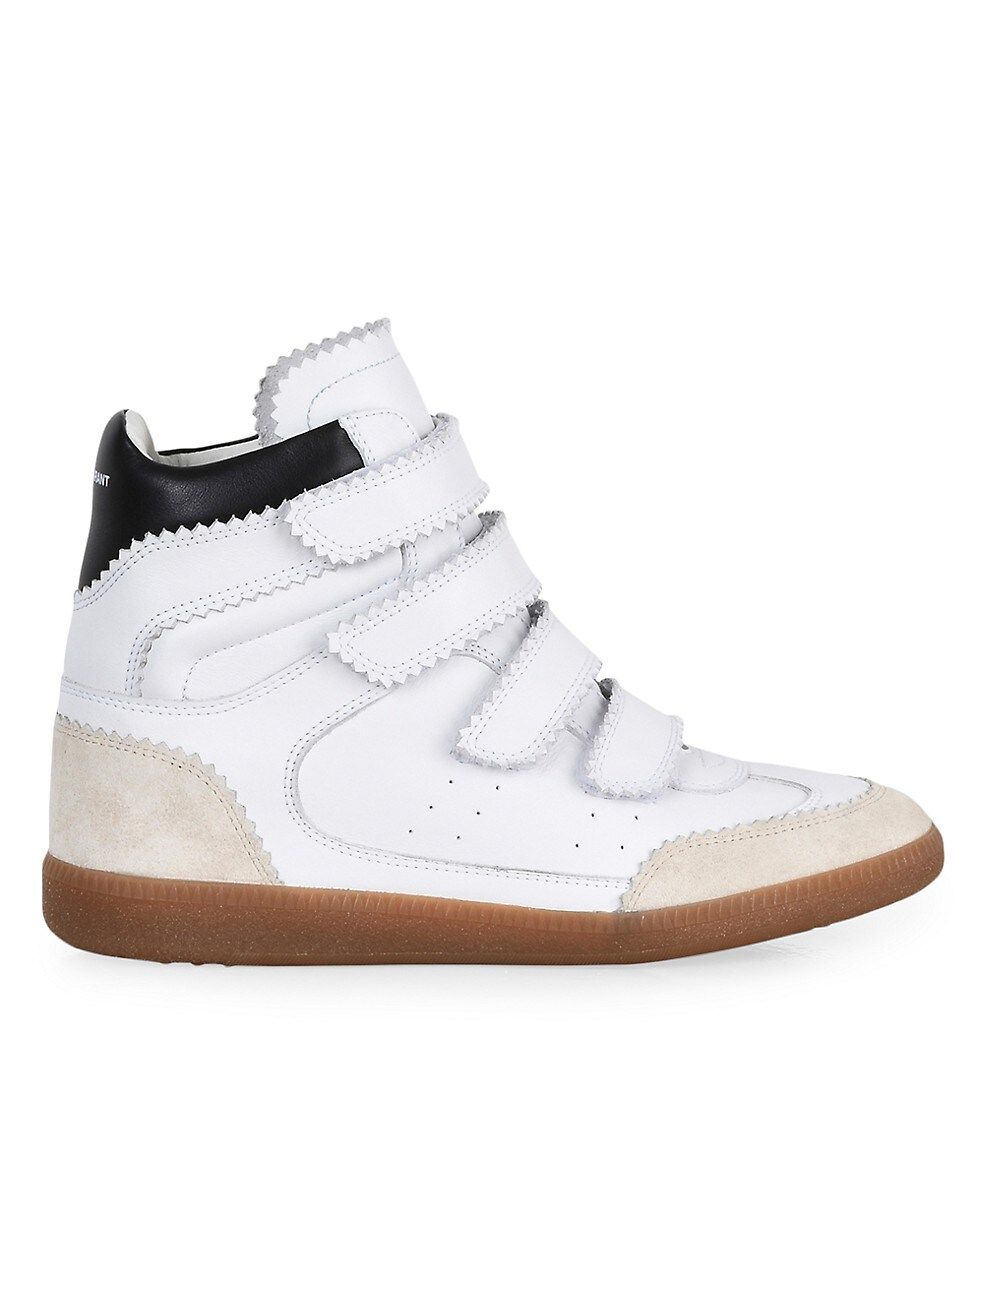 Isabel Marant Bilsy Suede Multi-Strap High-Top Sneakers | Saks Fifth Avenue